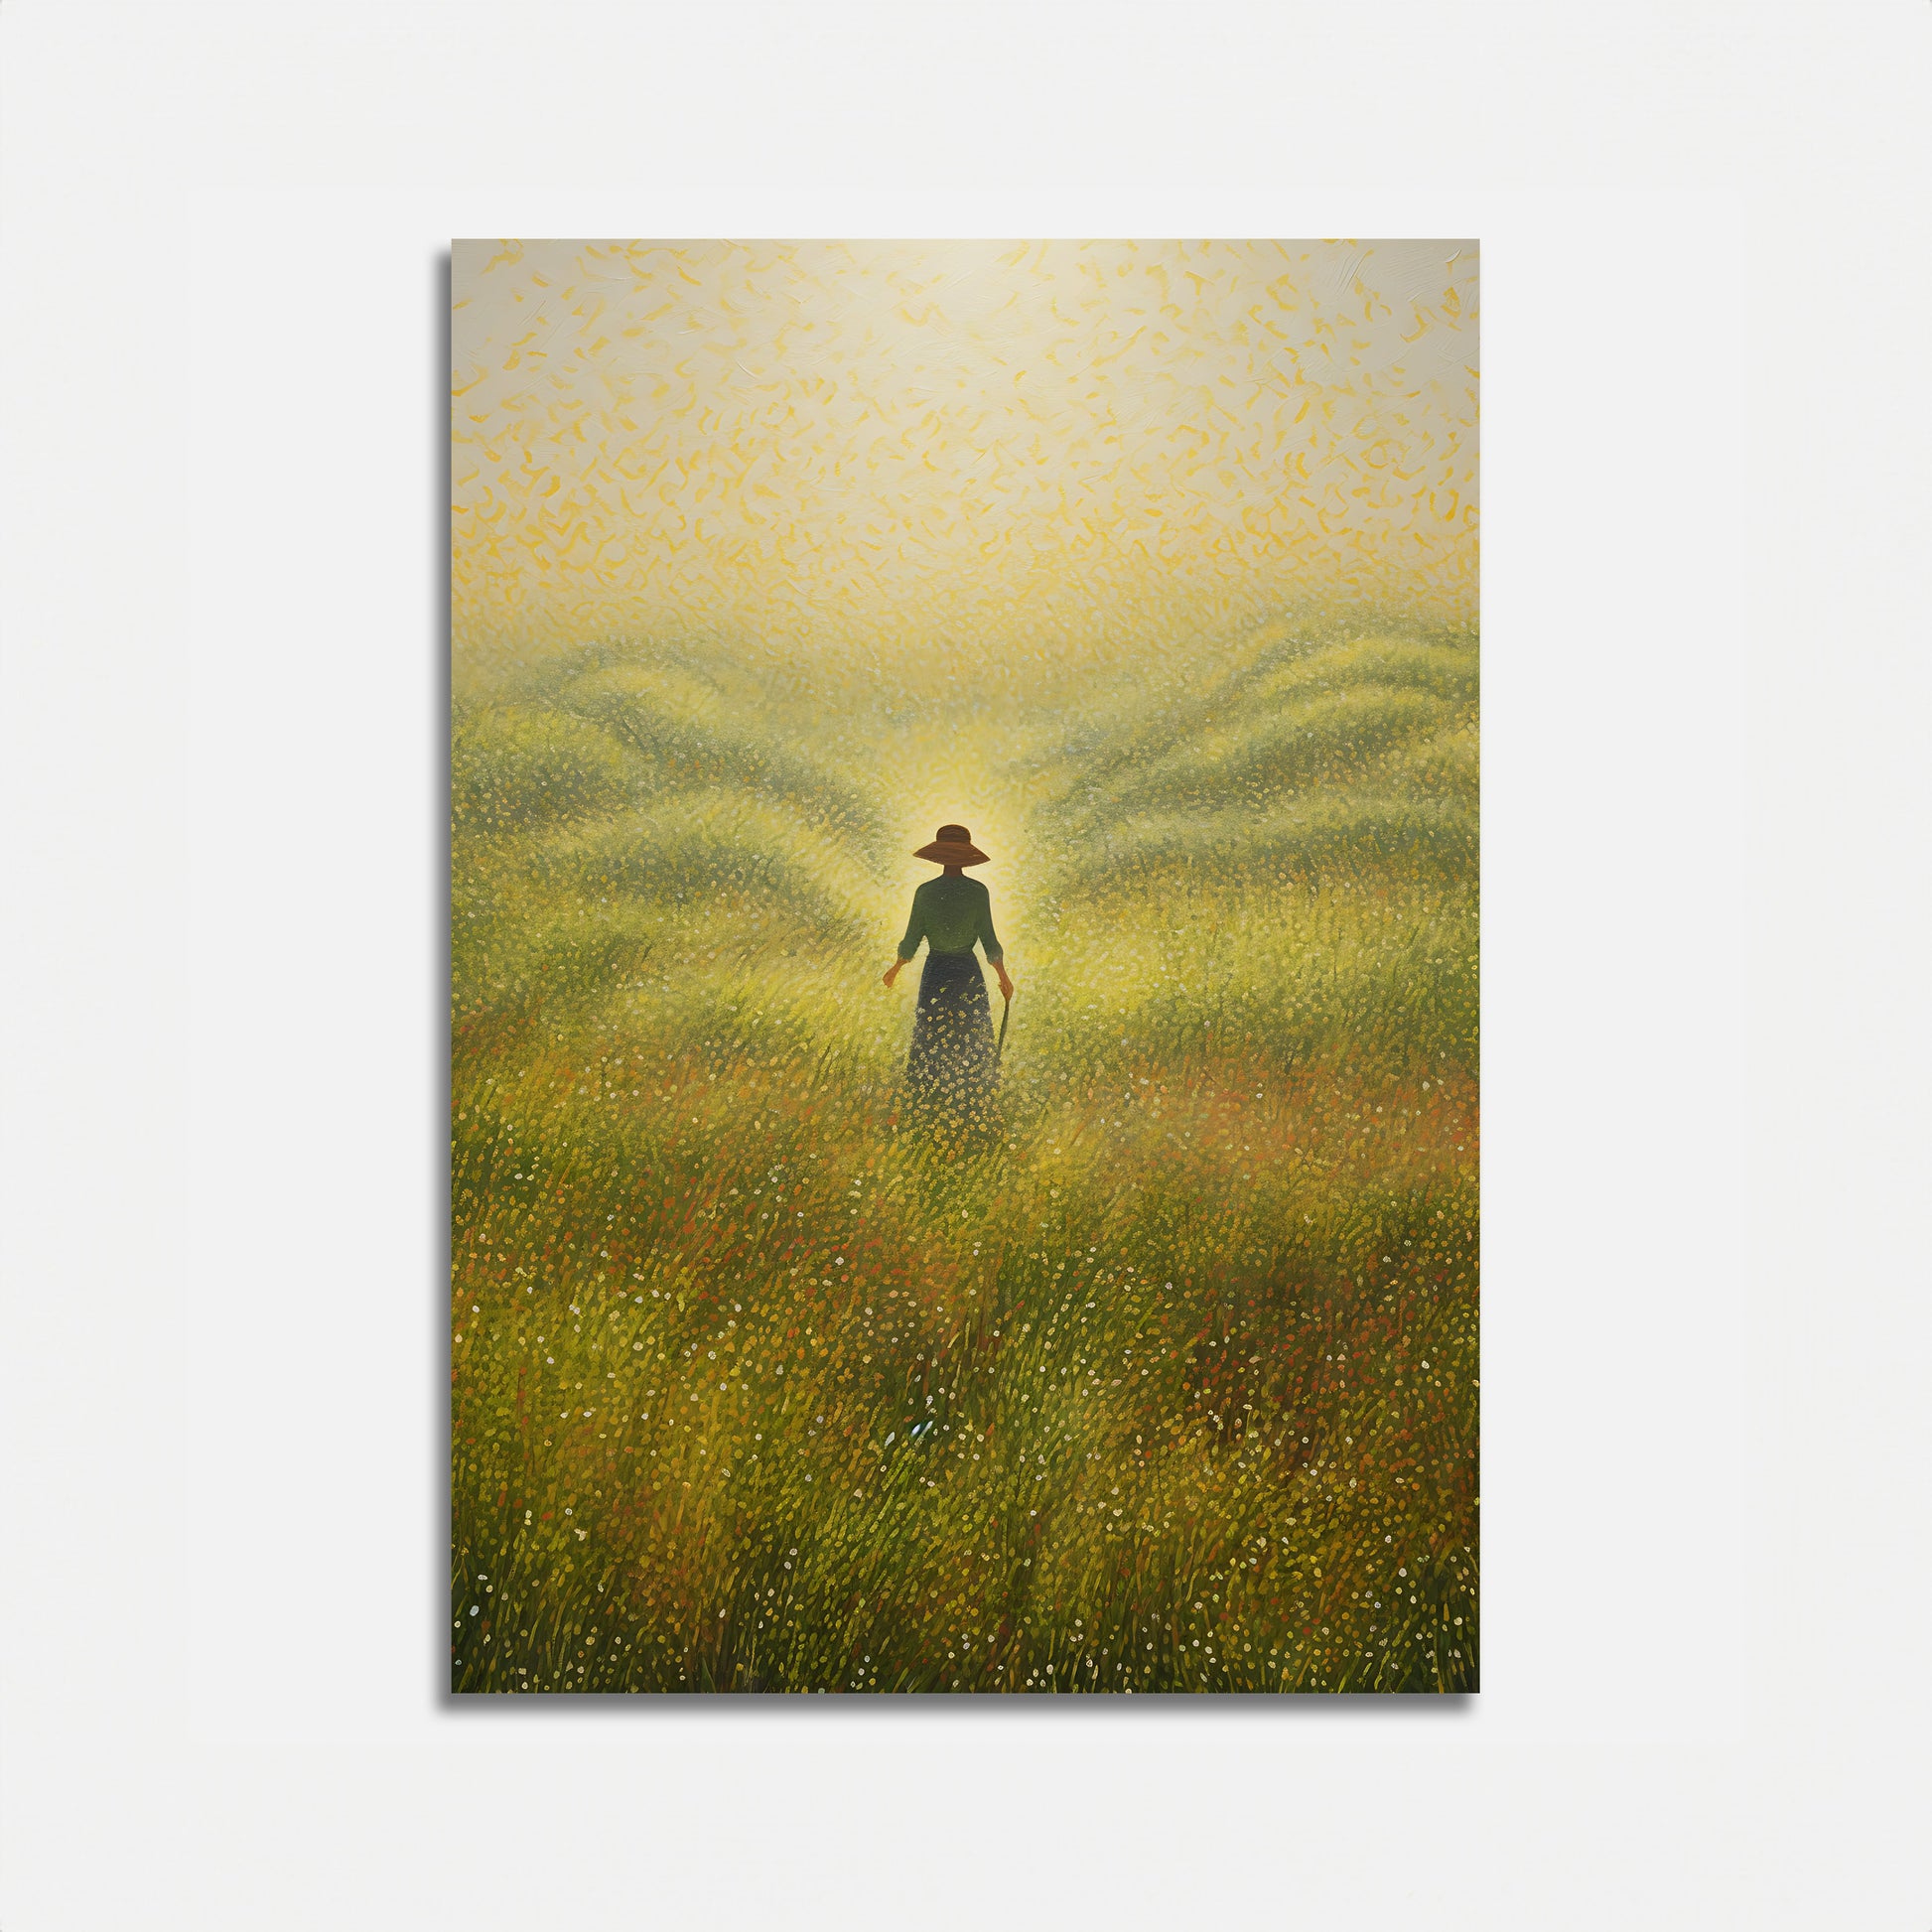 A painting of a person in a field under a golden sky with light patterns.